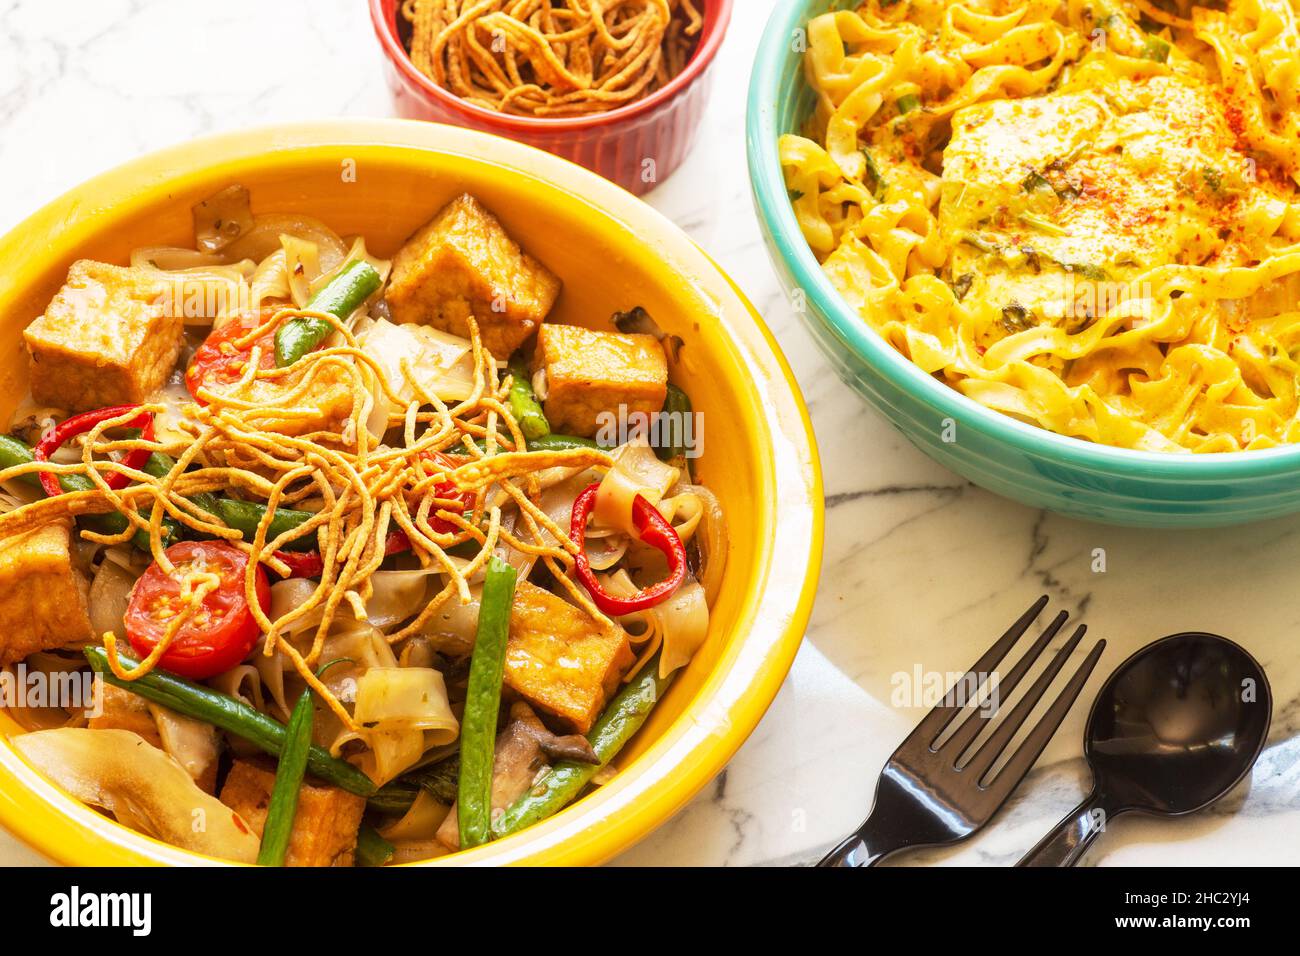 Hangover Noodles, and Northern Thai Curry Niidles. Stock Photo